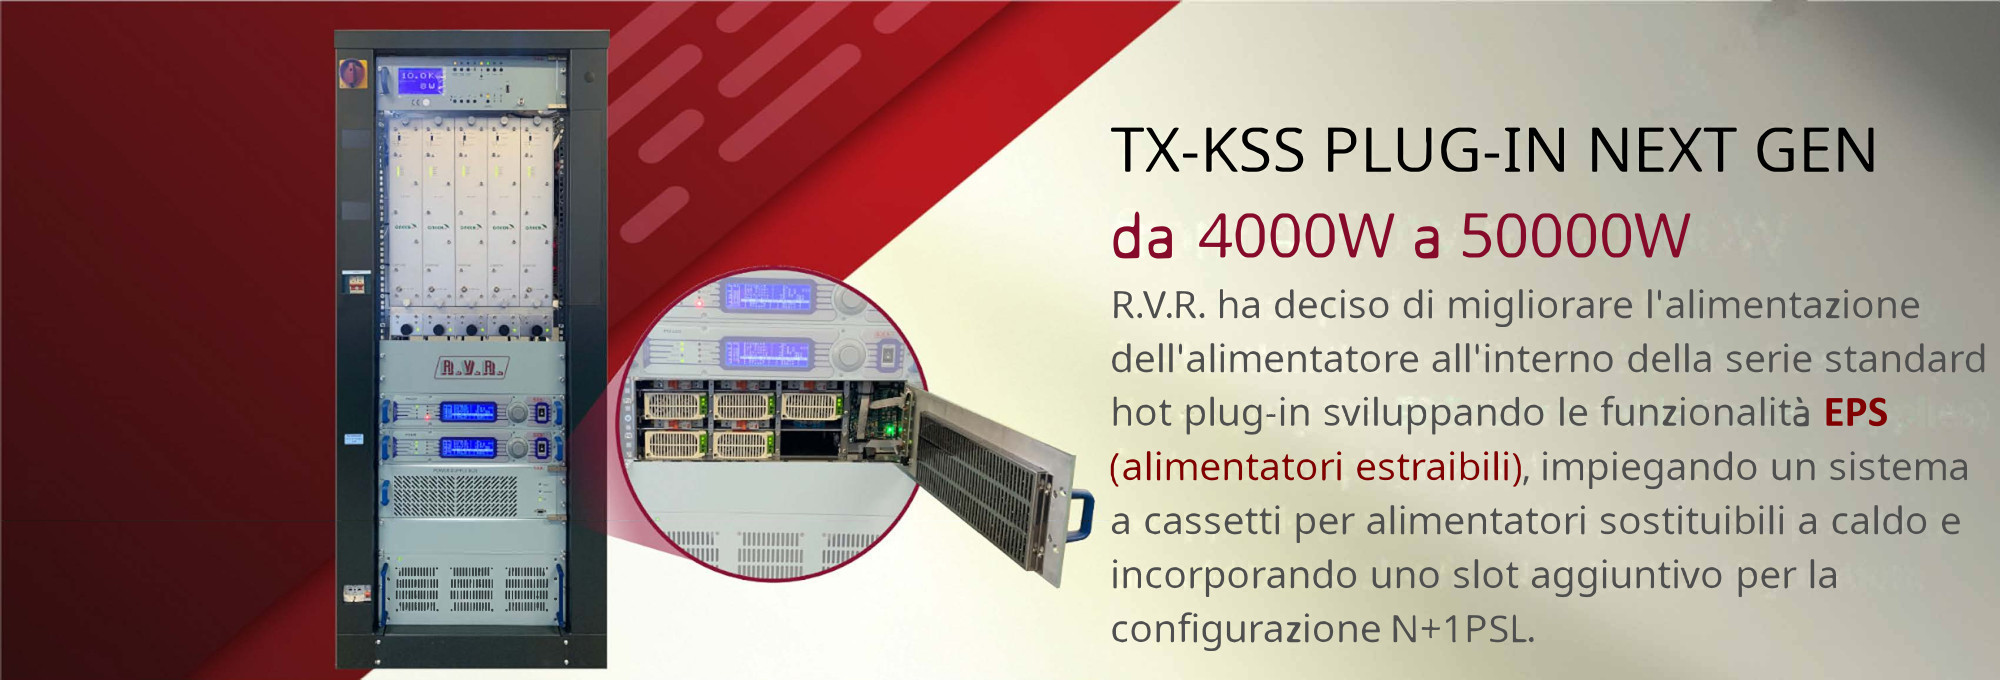 https://www.rvr.it/it/products/scalable-trasmitters/ts-kss-next-generatione-series/